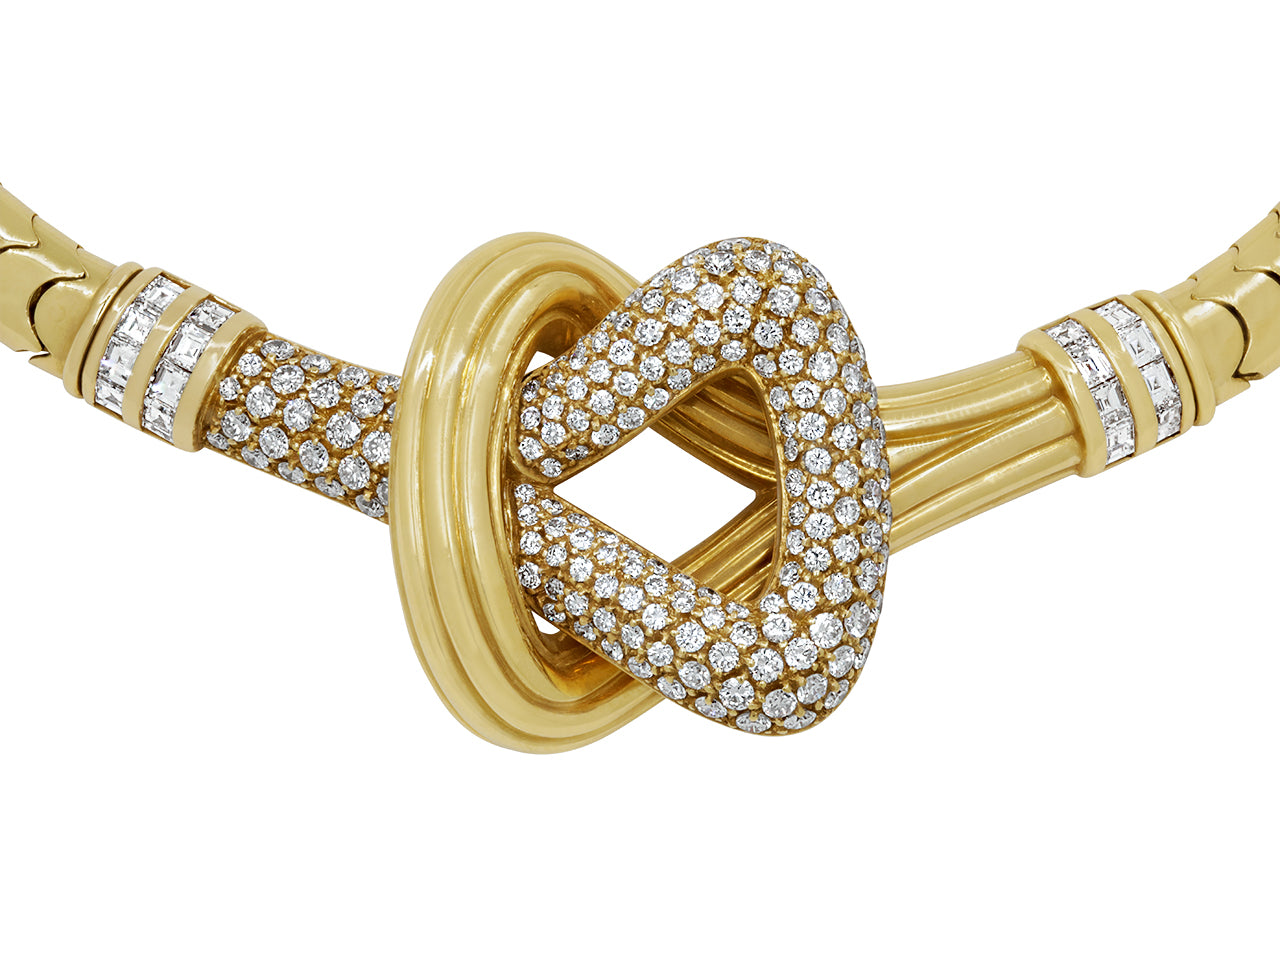 Cartier Diamond Knot Necklace in 18K Gold